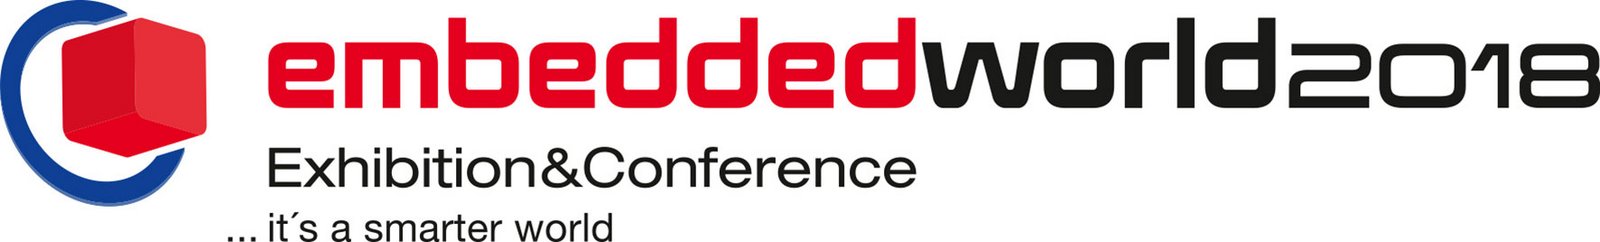 Allied Vision at embedded world exhibition & conference 2018